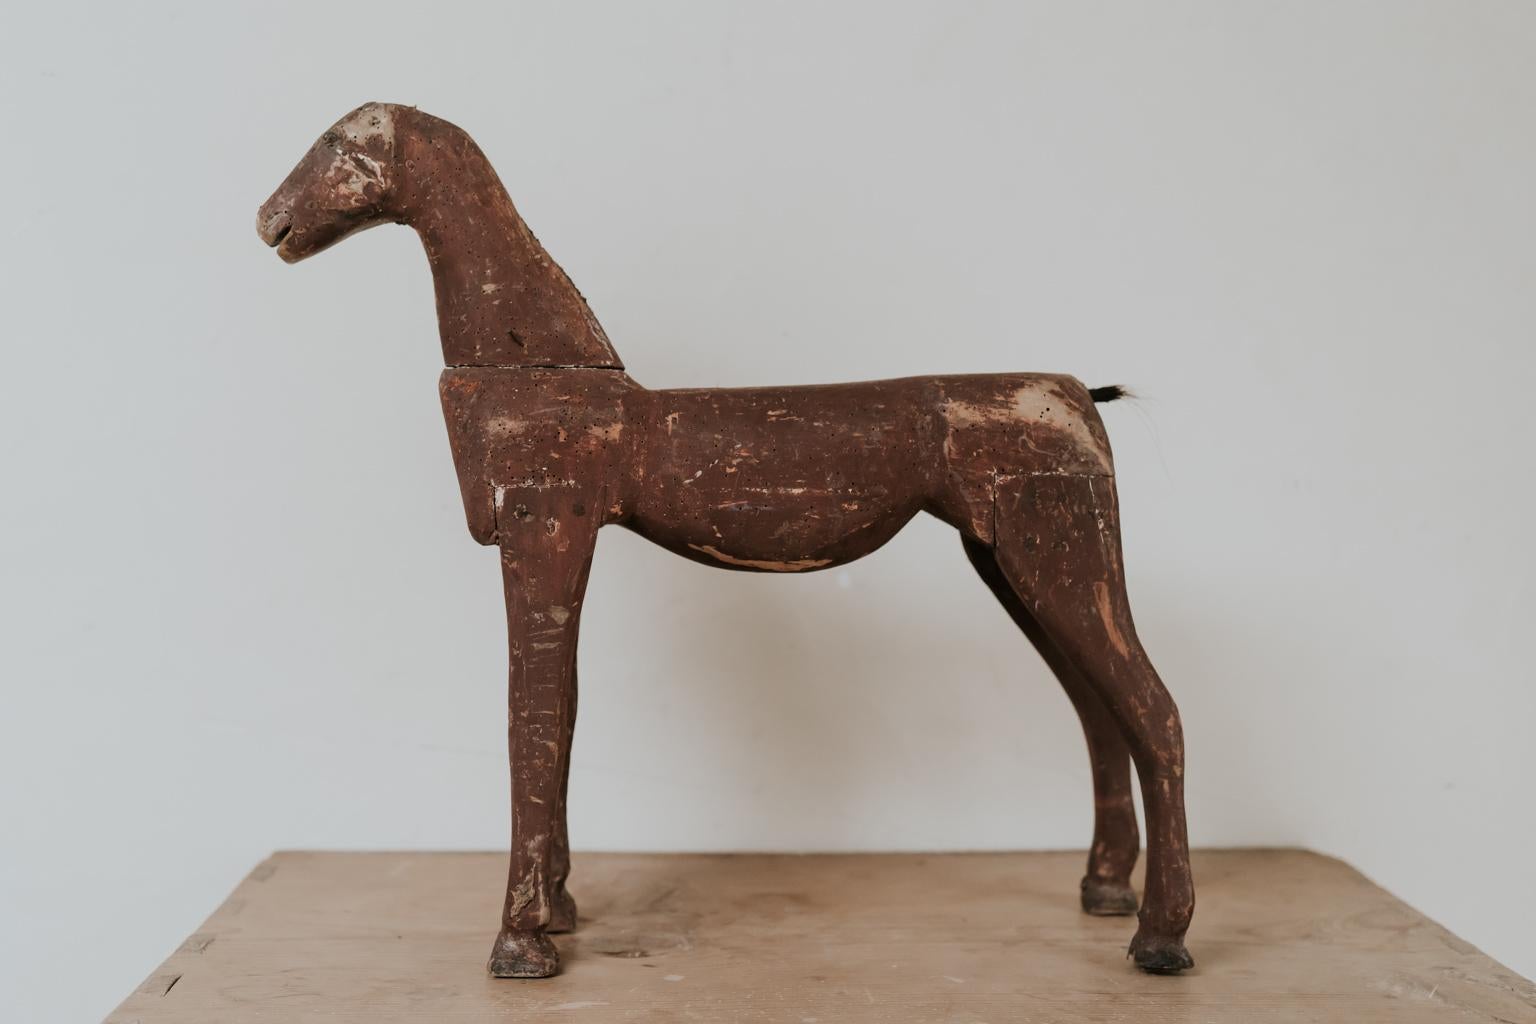 Hand-Painted 19th Century Wooden Toy Horse